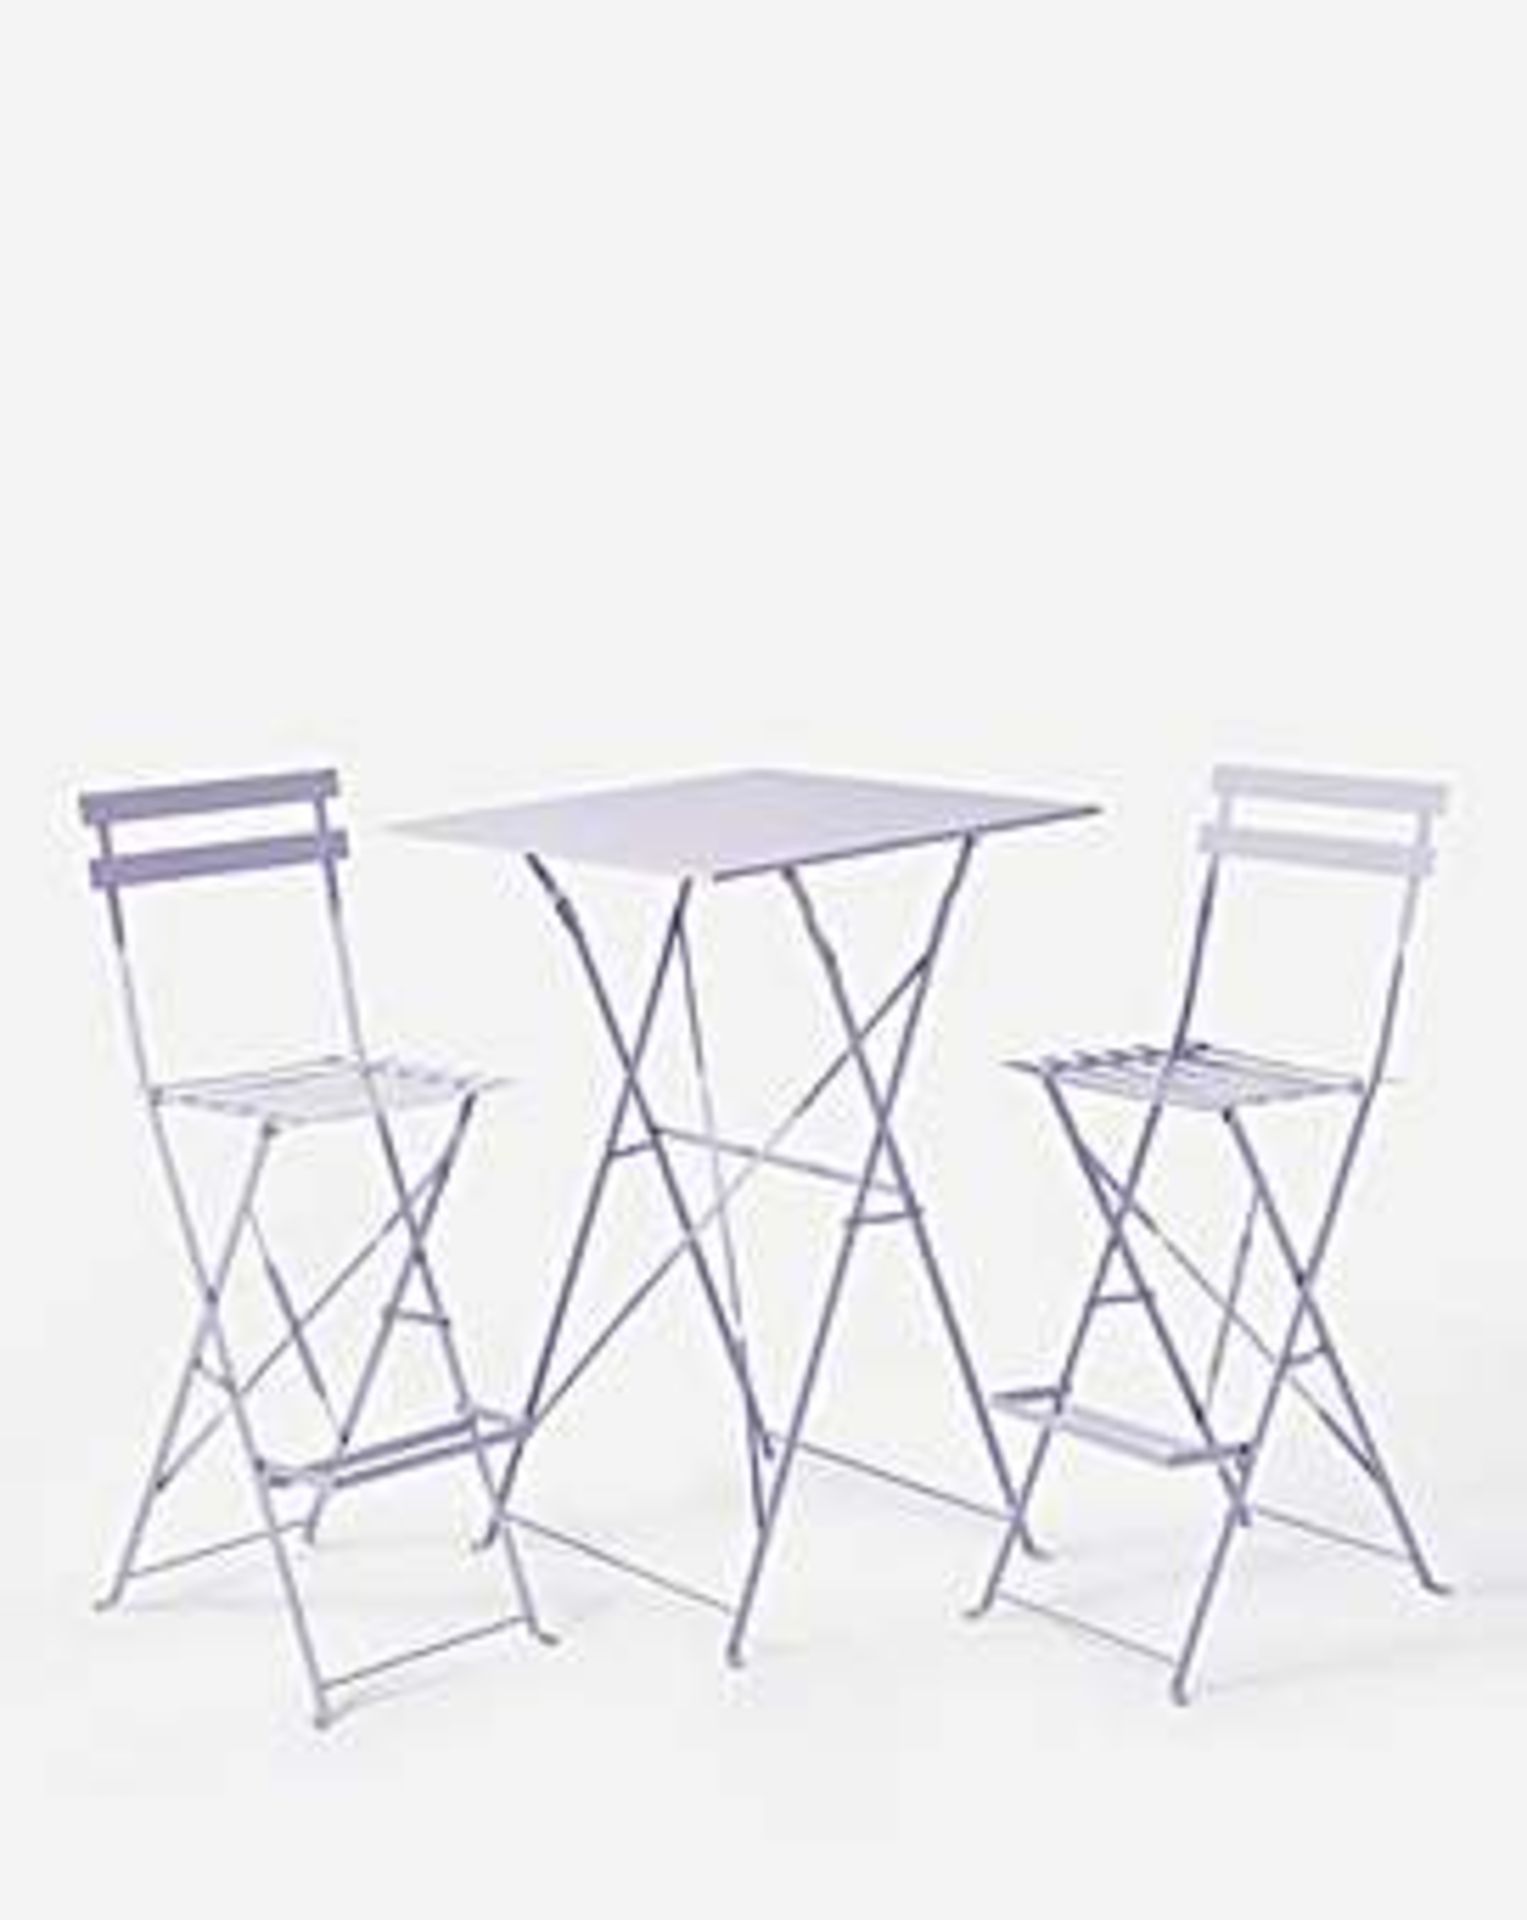 TRADE PALLET TO CONTAIN 6x BRAND NEW Palma Bistro Bar Set LILAC RRP £159 EACH - Image 2 of 2